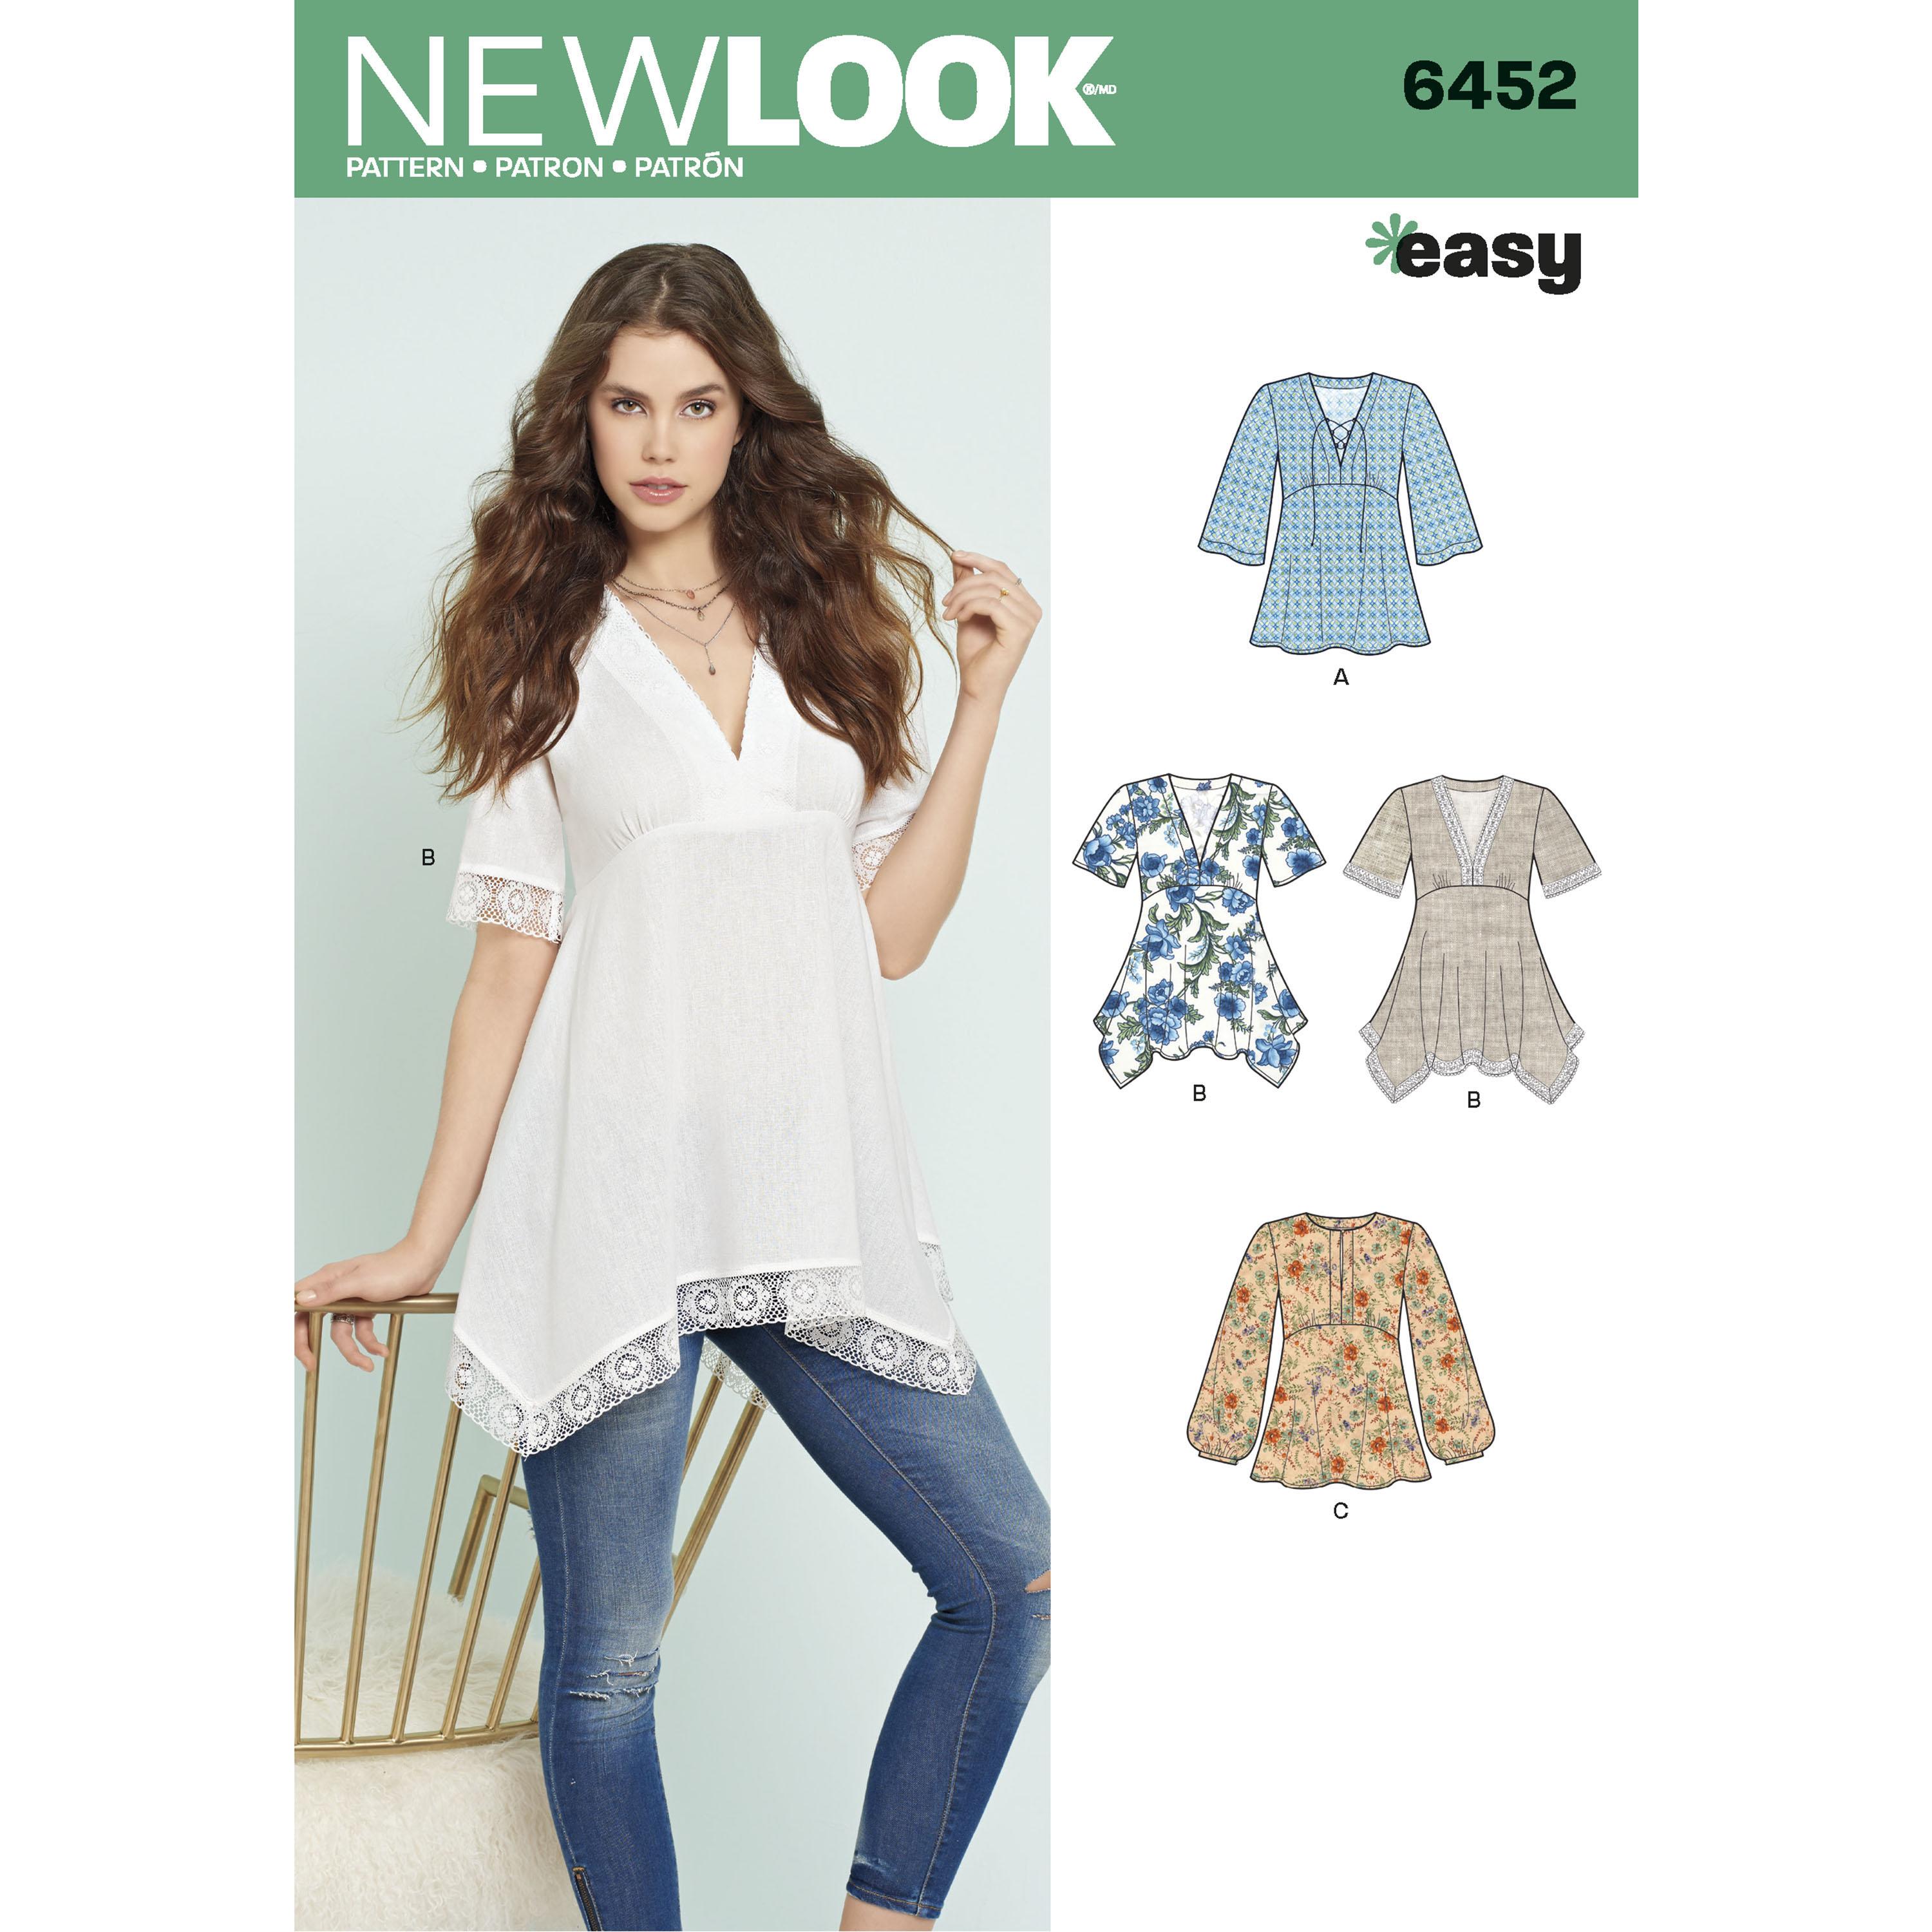 NewLook N6452 Misses' Tops with Bodice and Hemline Variations